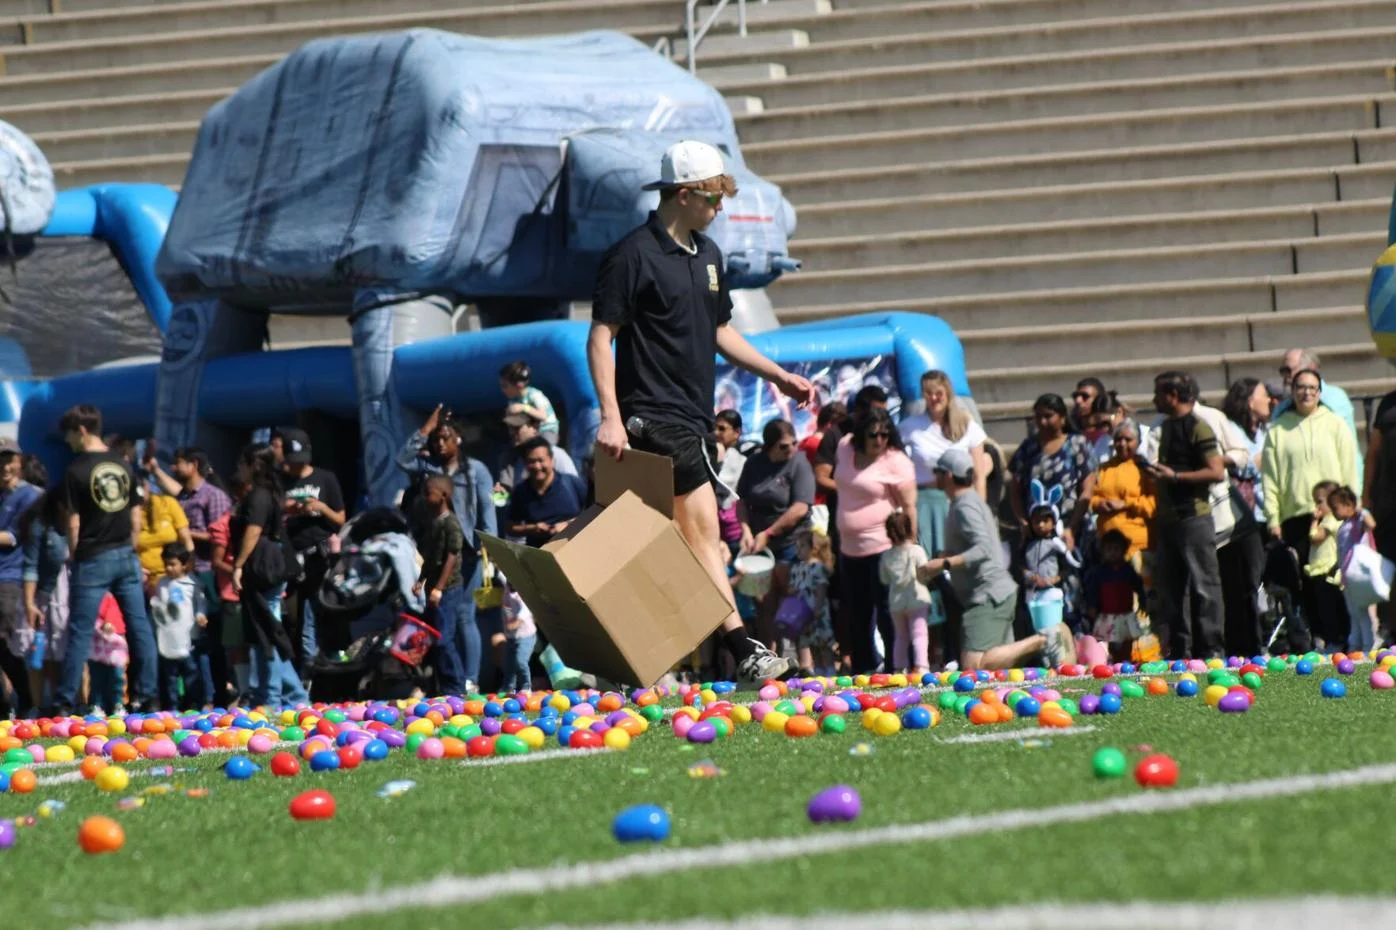 Sprayberry High's Eggstraordinary Easter Event: A Sky Filled with Surprises